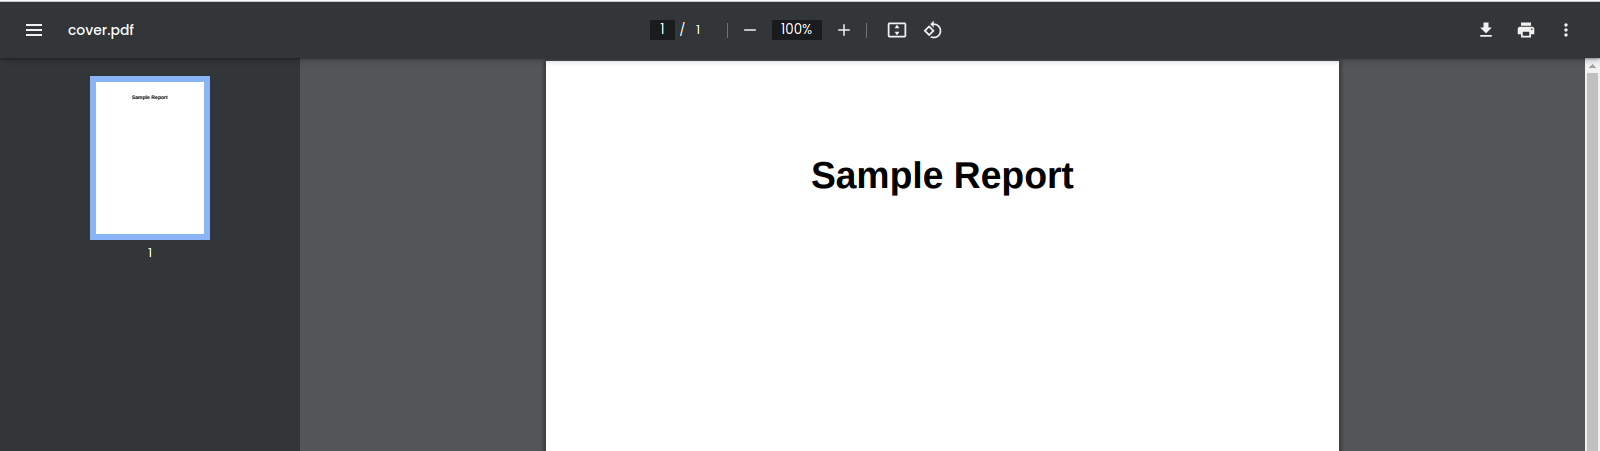 a PDF document with a single page that says "Sample Report"